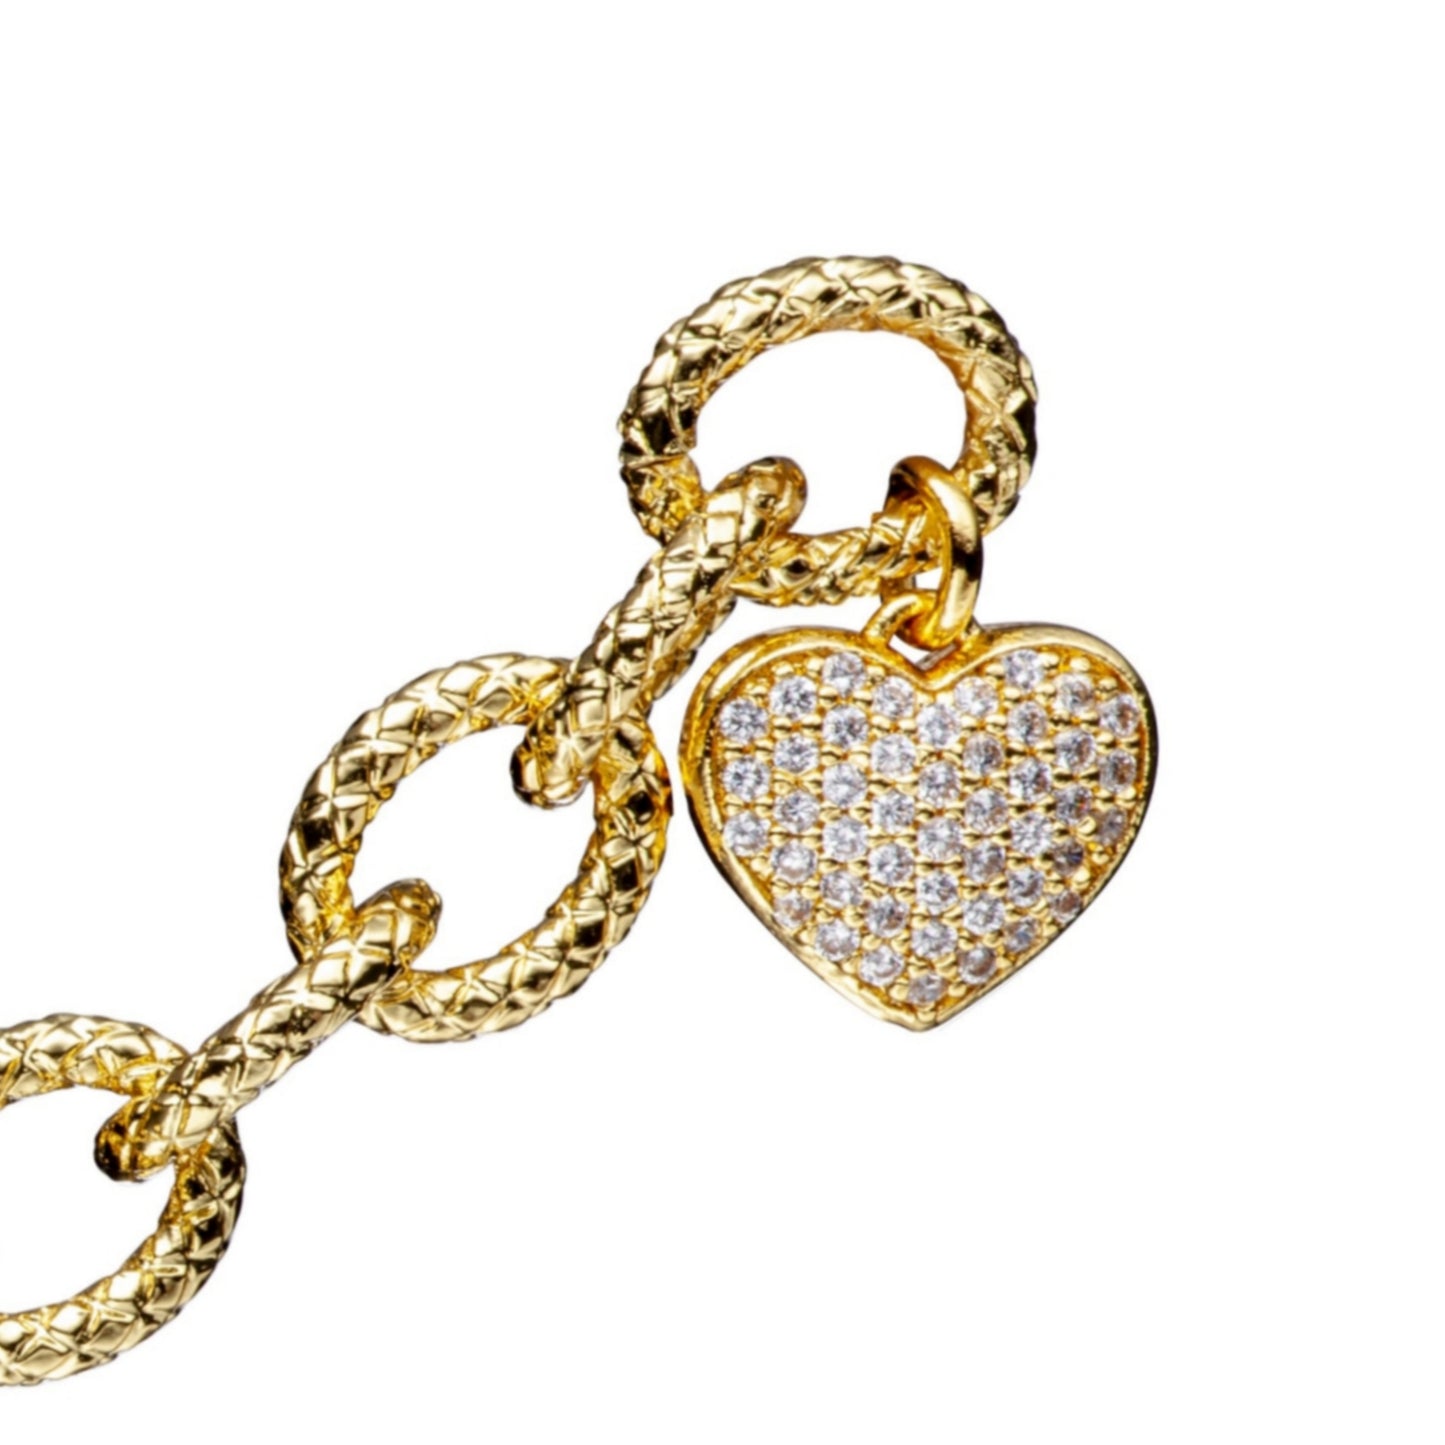 Textured Large Link With Large CZ Puffy Heart Charm Bracelet - HK Jewels